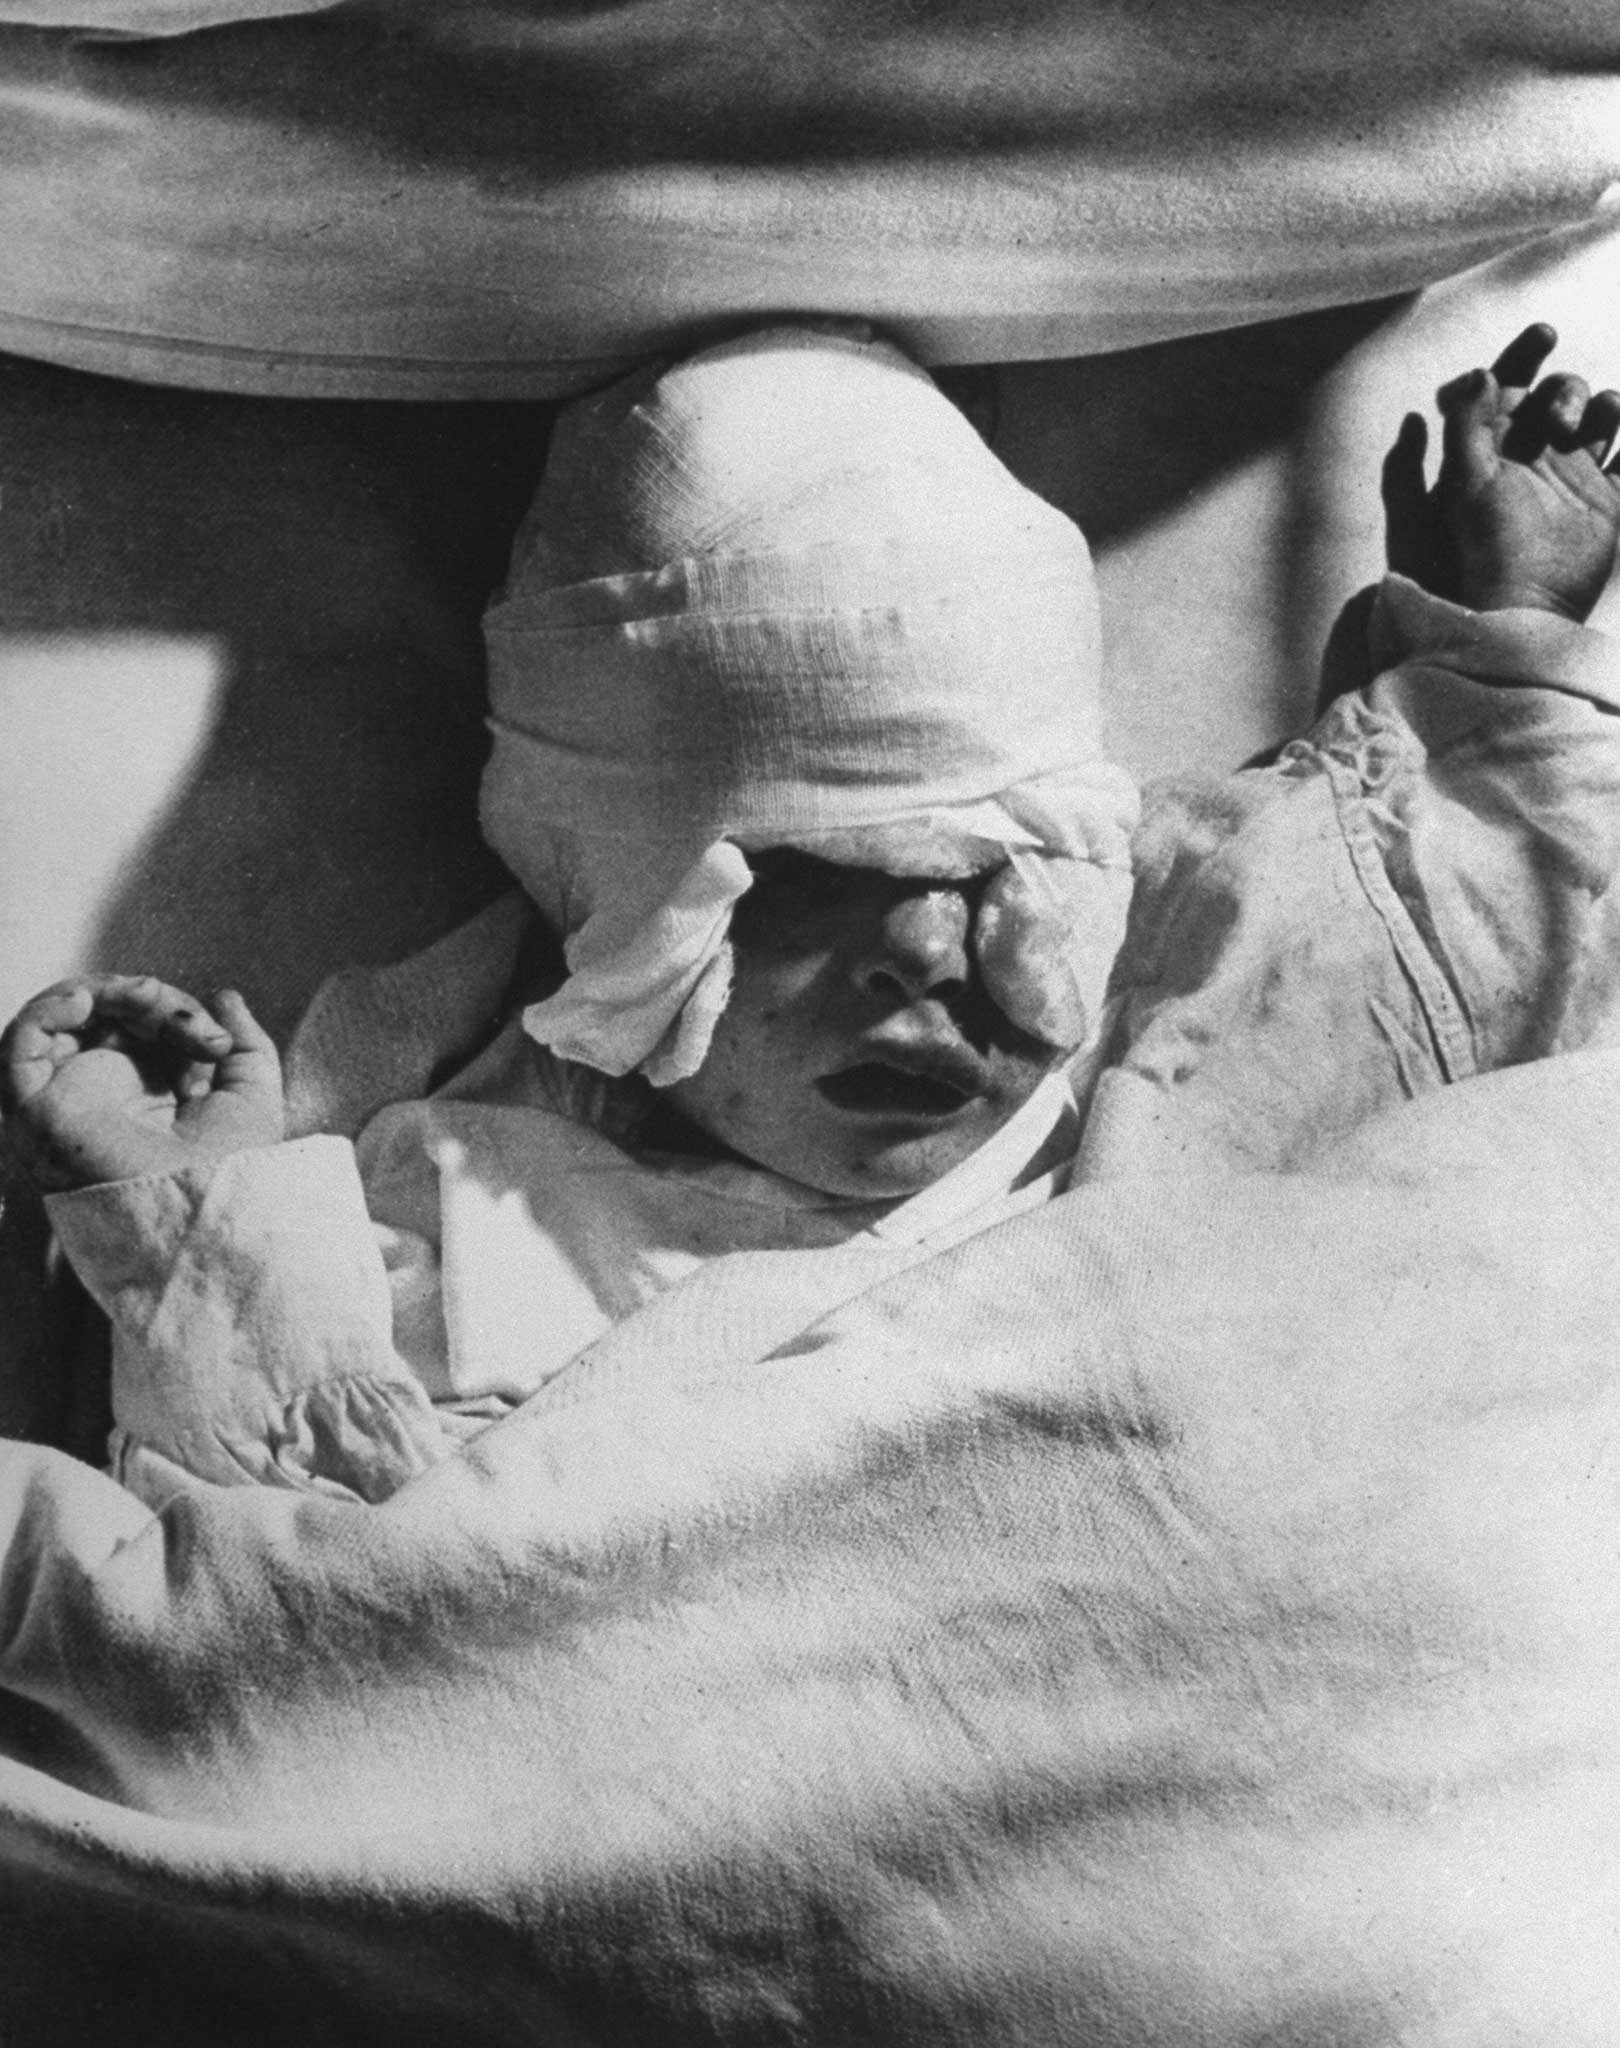 1940 | A heavily bandaged British infant, Margaret Curtis, badly injured in a German blitzkrieg attack on London during the Battle of Britain. Originally published in the September 9, 1940, issue of LIFE.